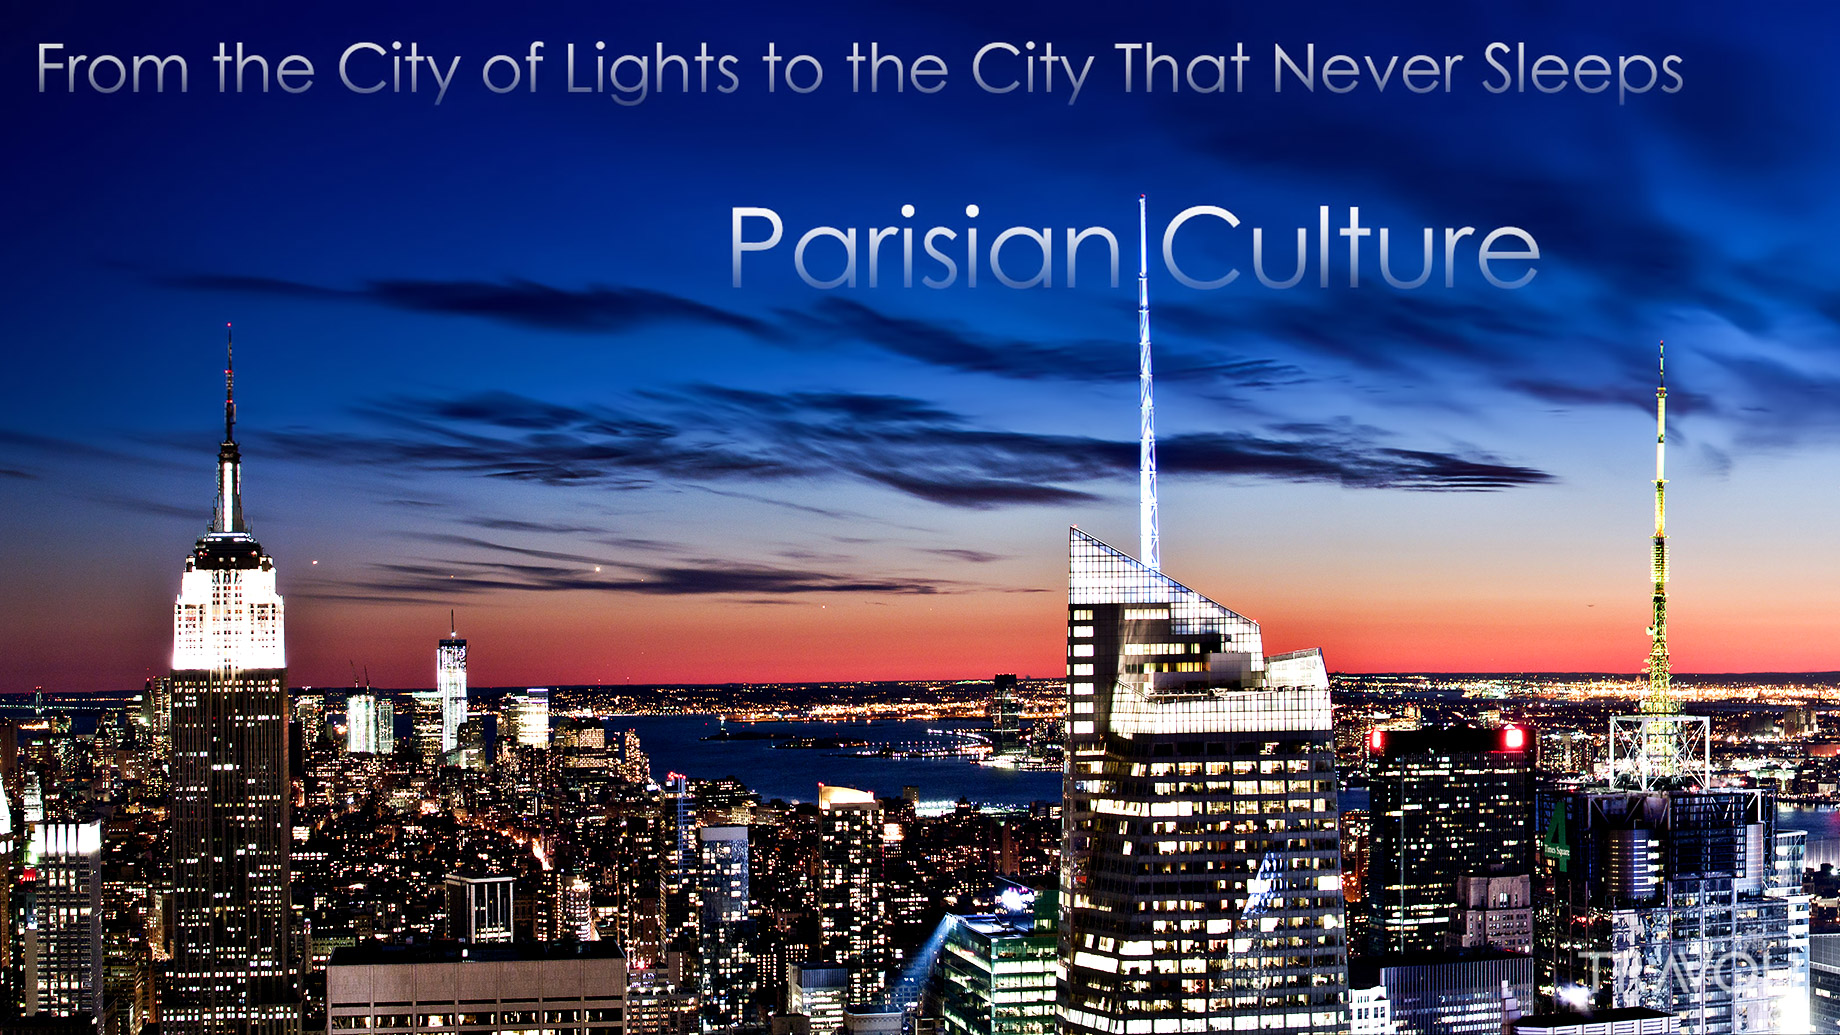 From the City of Lights to the City that Never Sleeps - Parisian Culture in New York